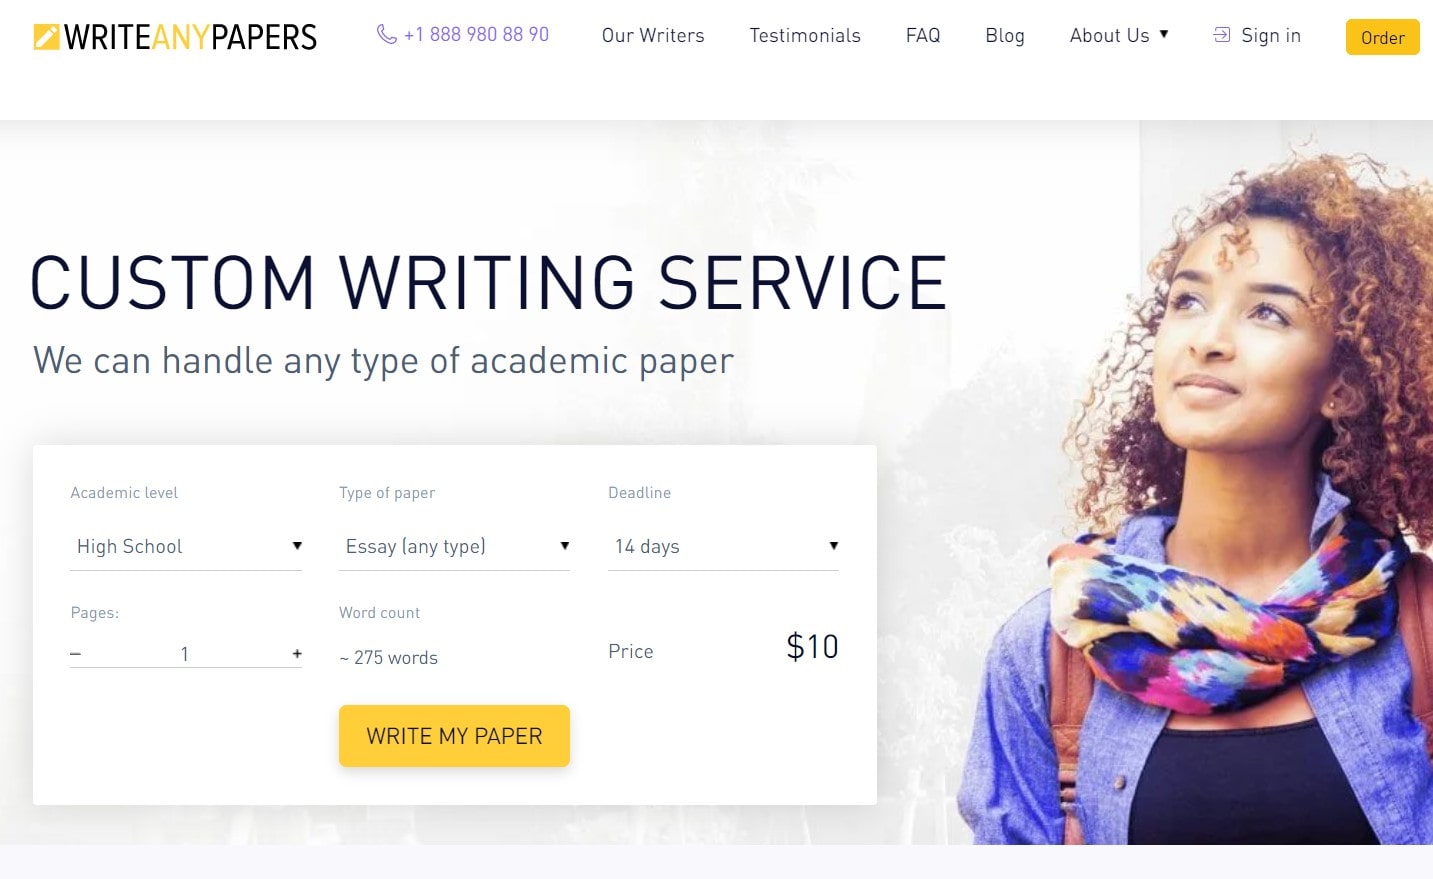 WriteAnyPapers.com